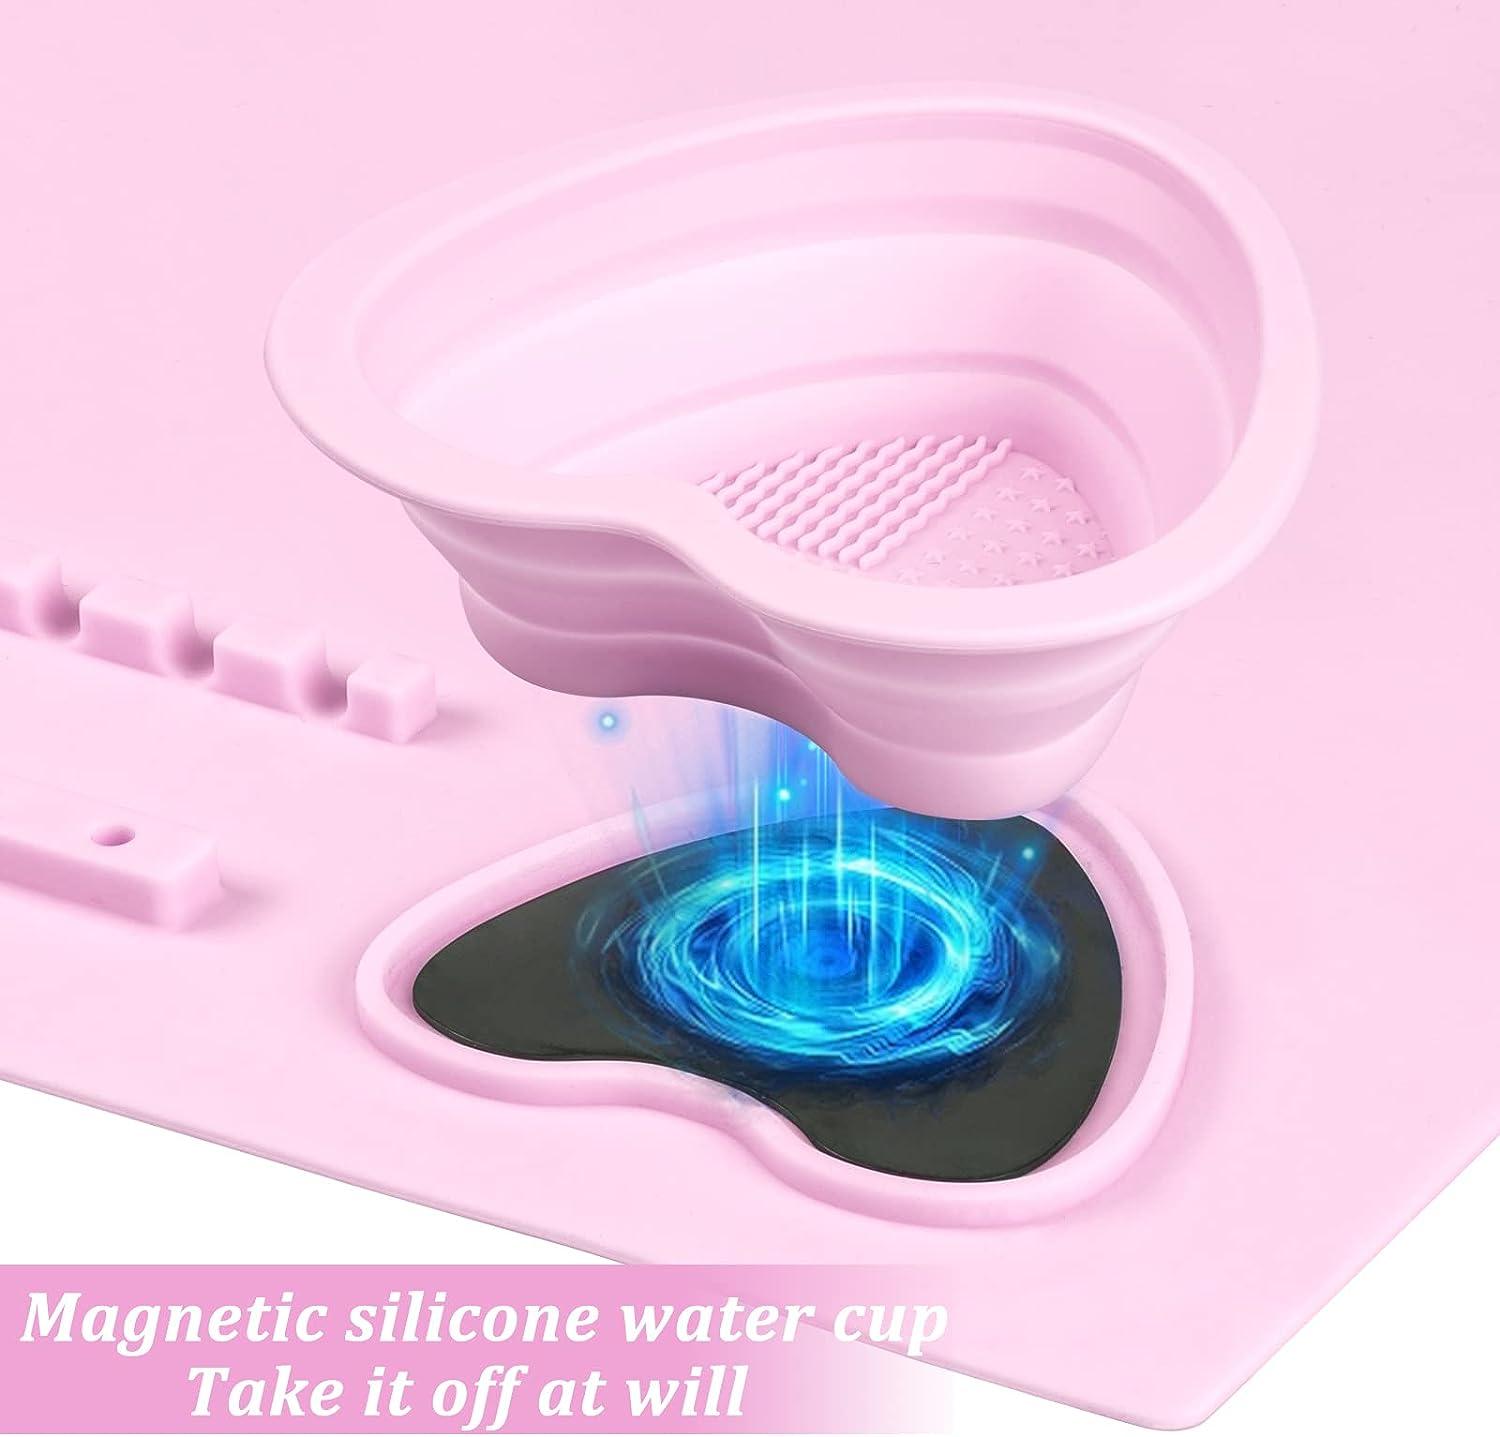 Silicone Craft Mat With Cup Fast Drying Heat Proof Silicone Craft